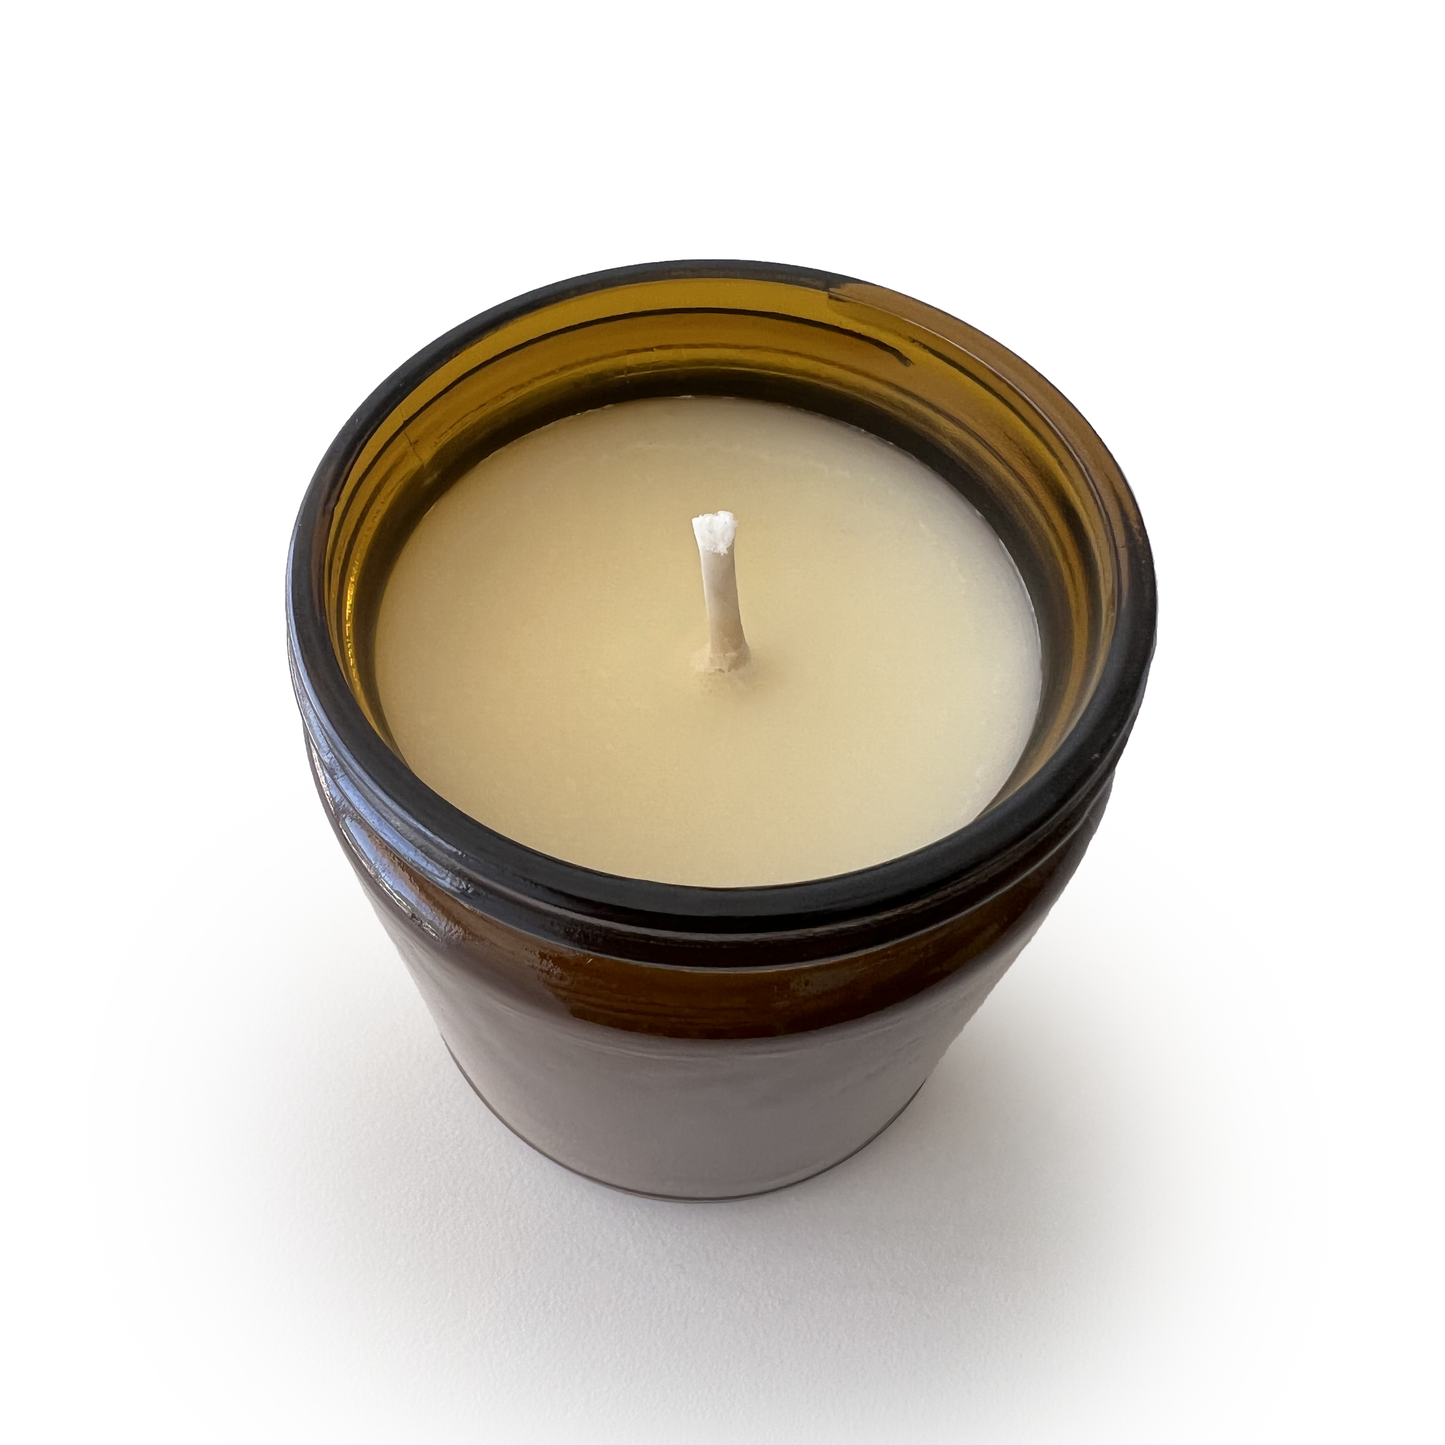 Baked Bread - Soy Candle 9oz